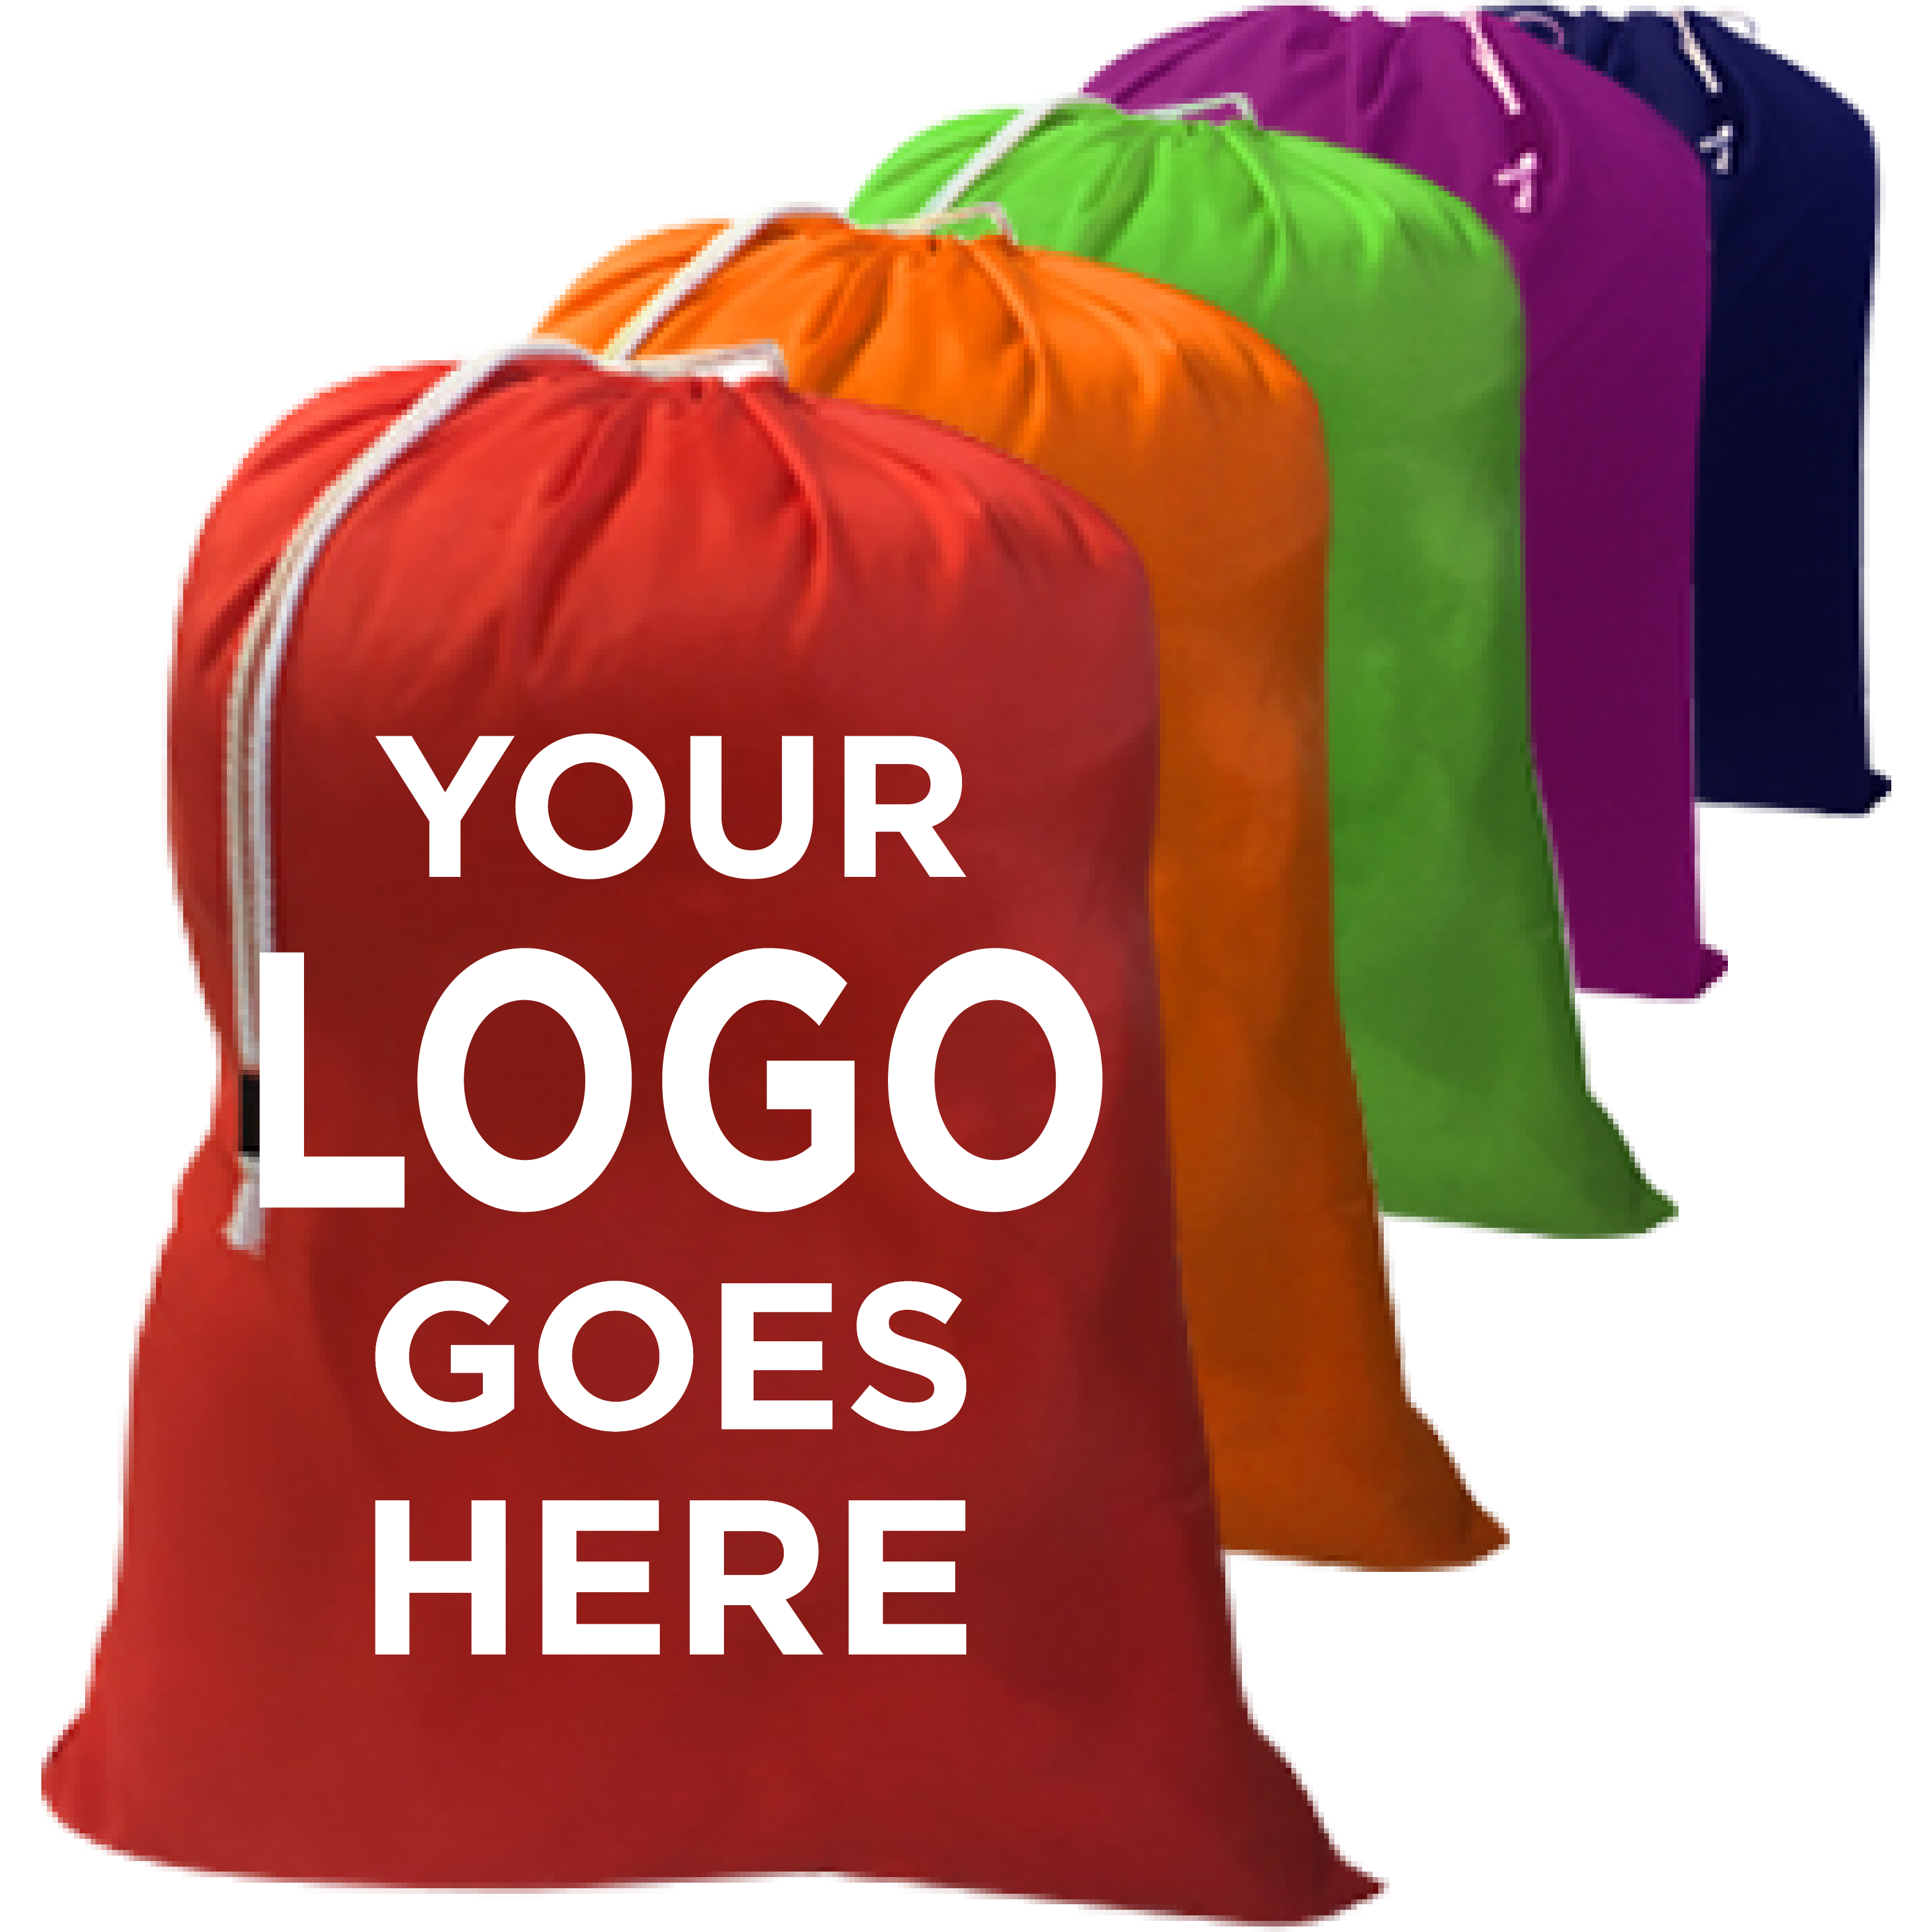 1-Color Custom Printing on Laundry Bags - as Low as $1.25 ea. (Cost of the only; Cost of bag in not included; Order your Laundry Bags - FIRST).